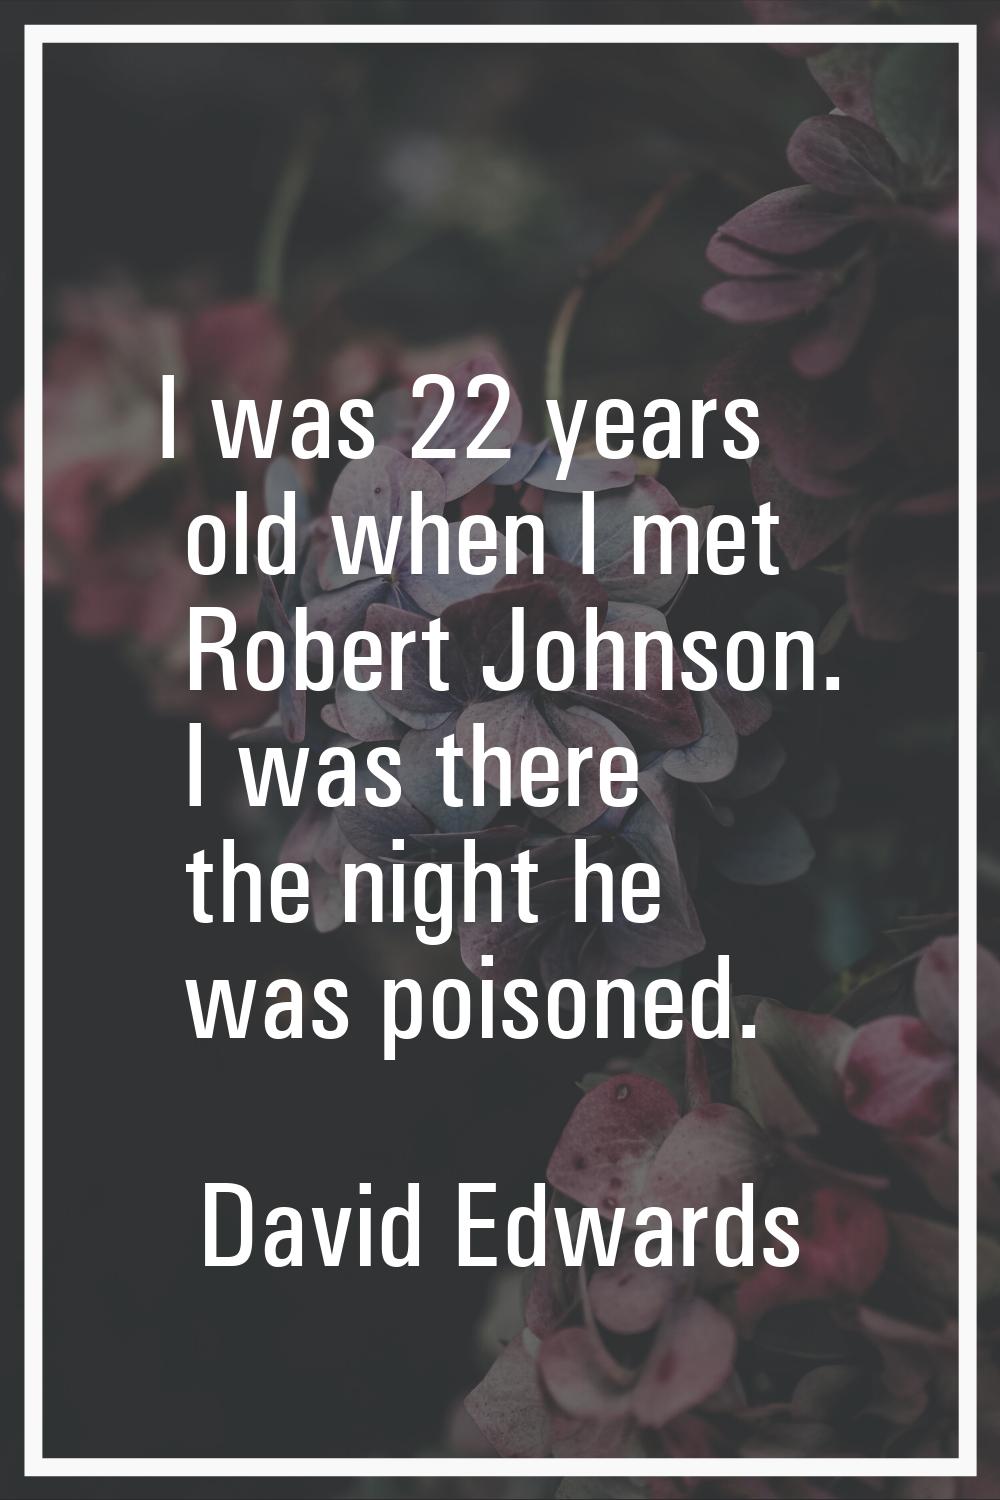 I was 22 years old when I met Robert Johnson. I was there the night he was poisoned.